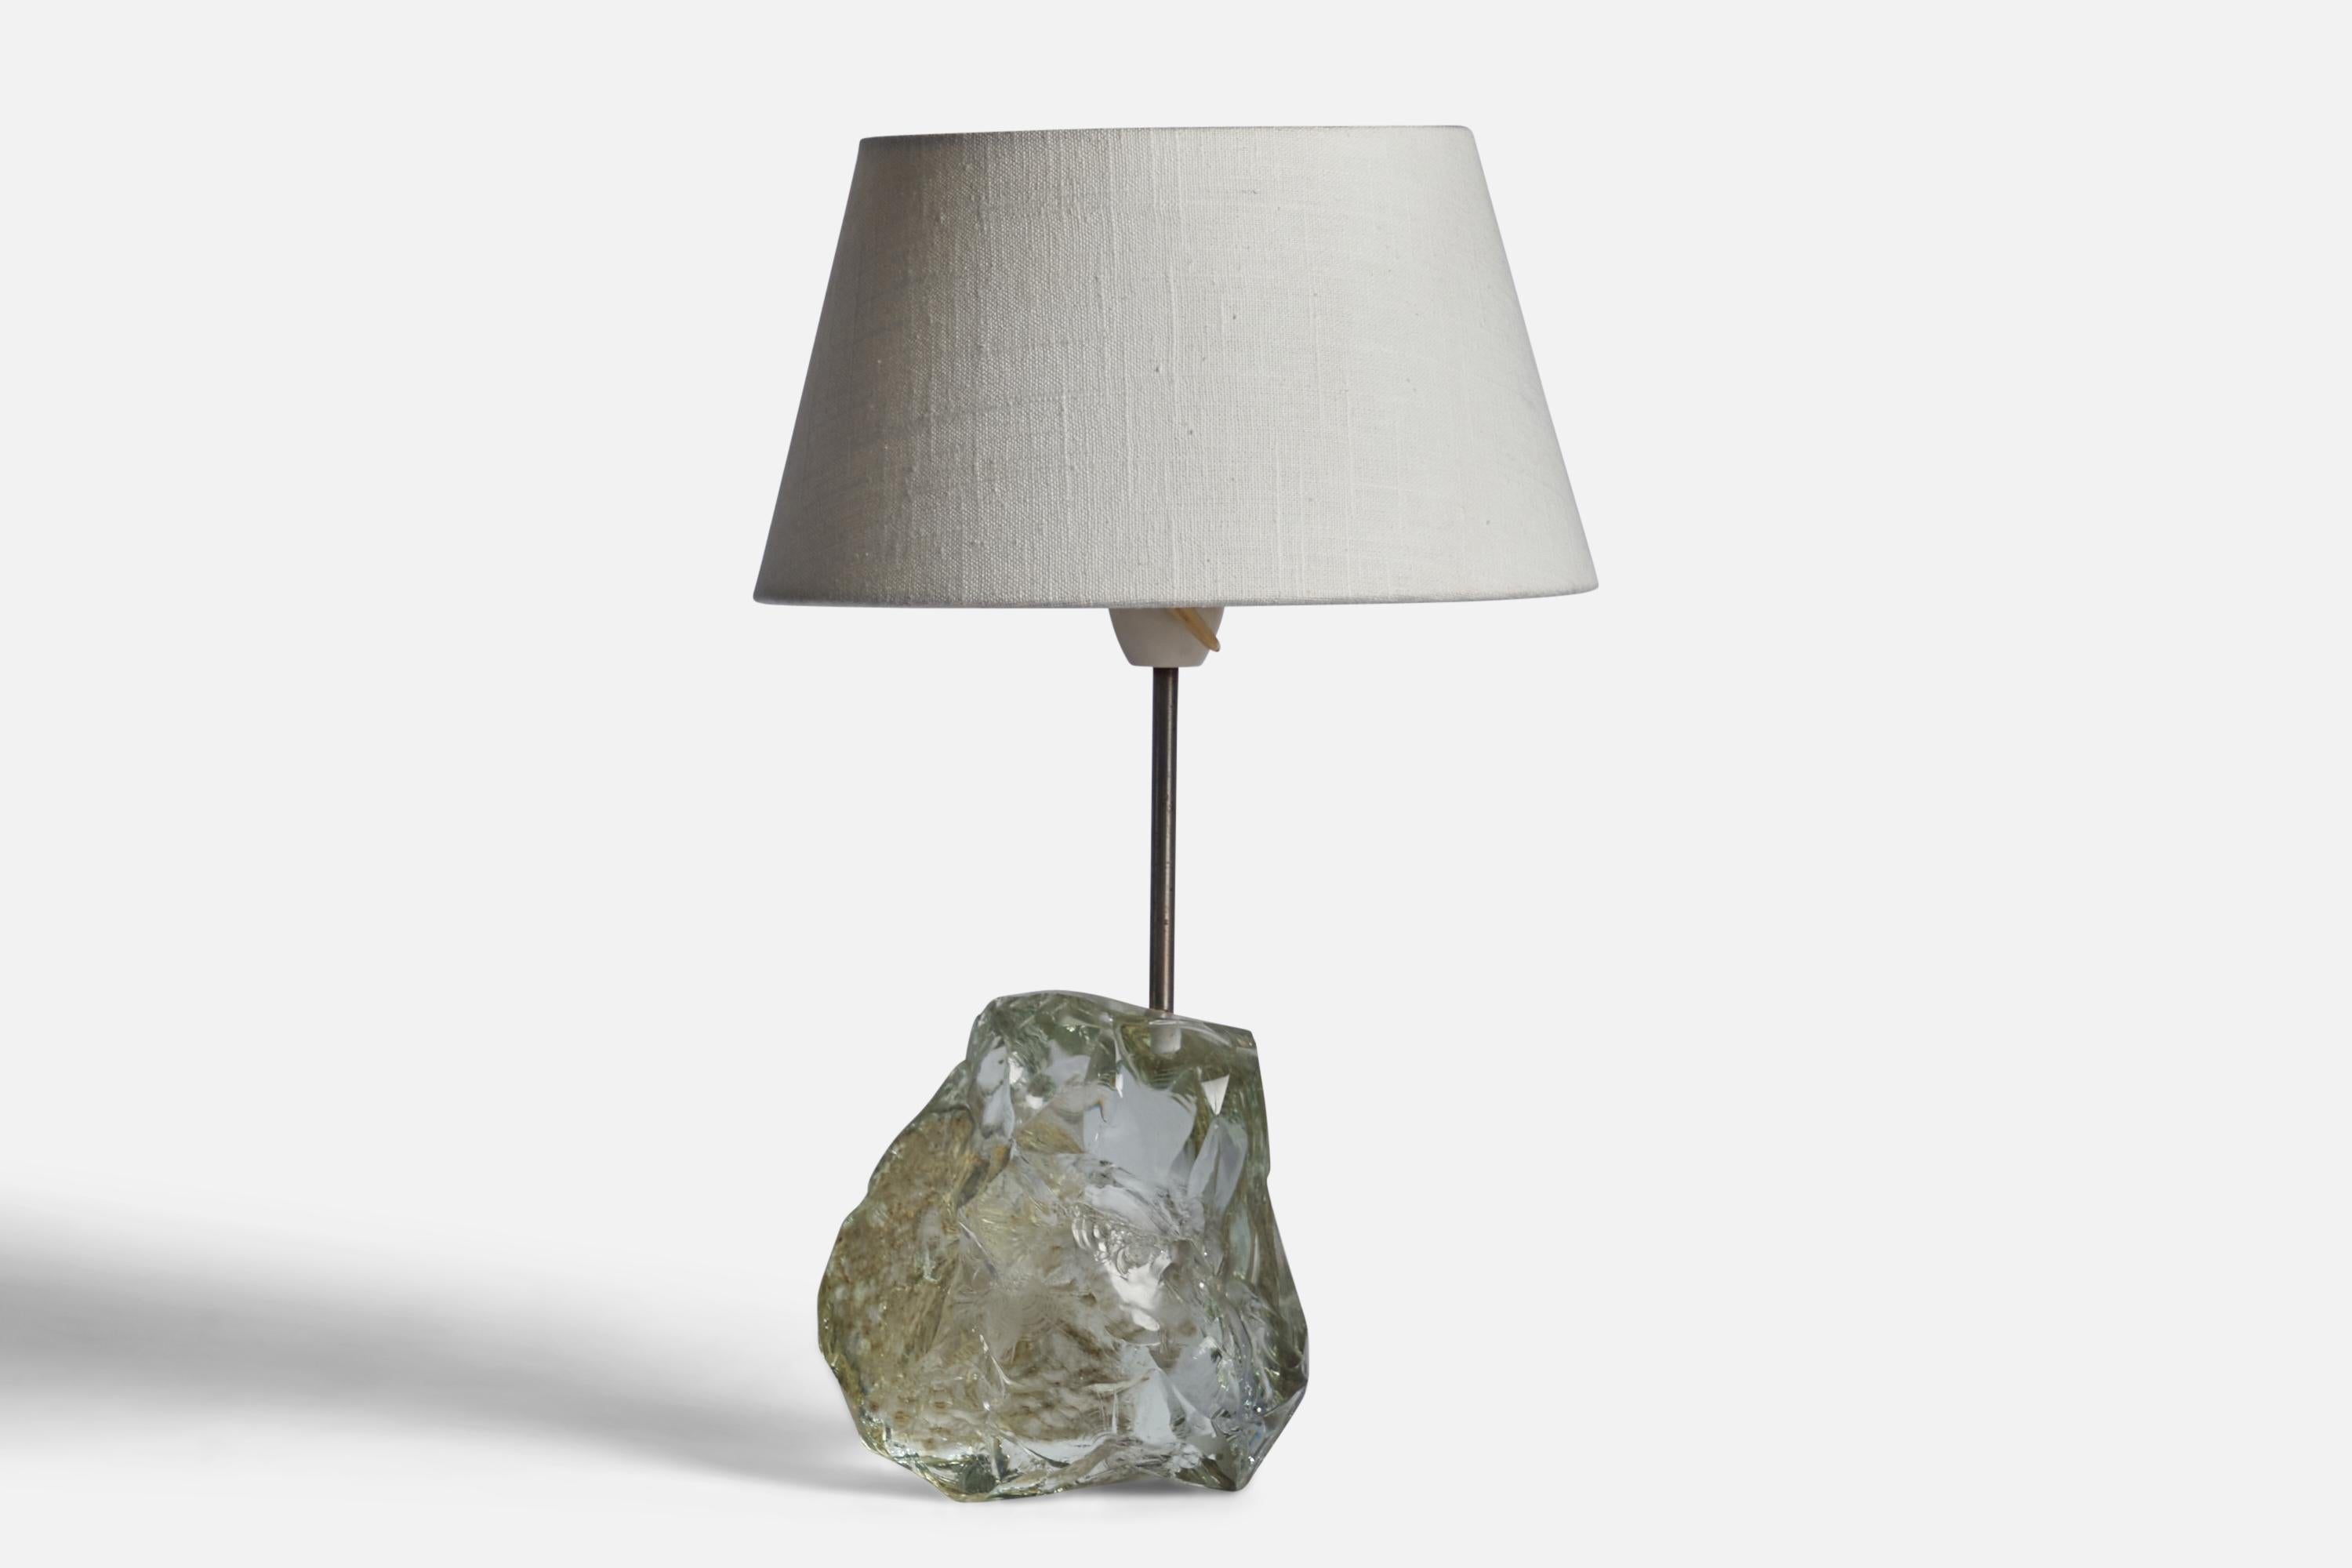 A glass and metal table lamp designed and produced in Denmark, 1960s.

Dimensions of Lamp (inches): 12.75